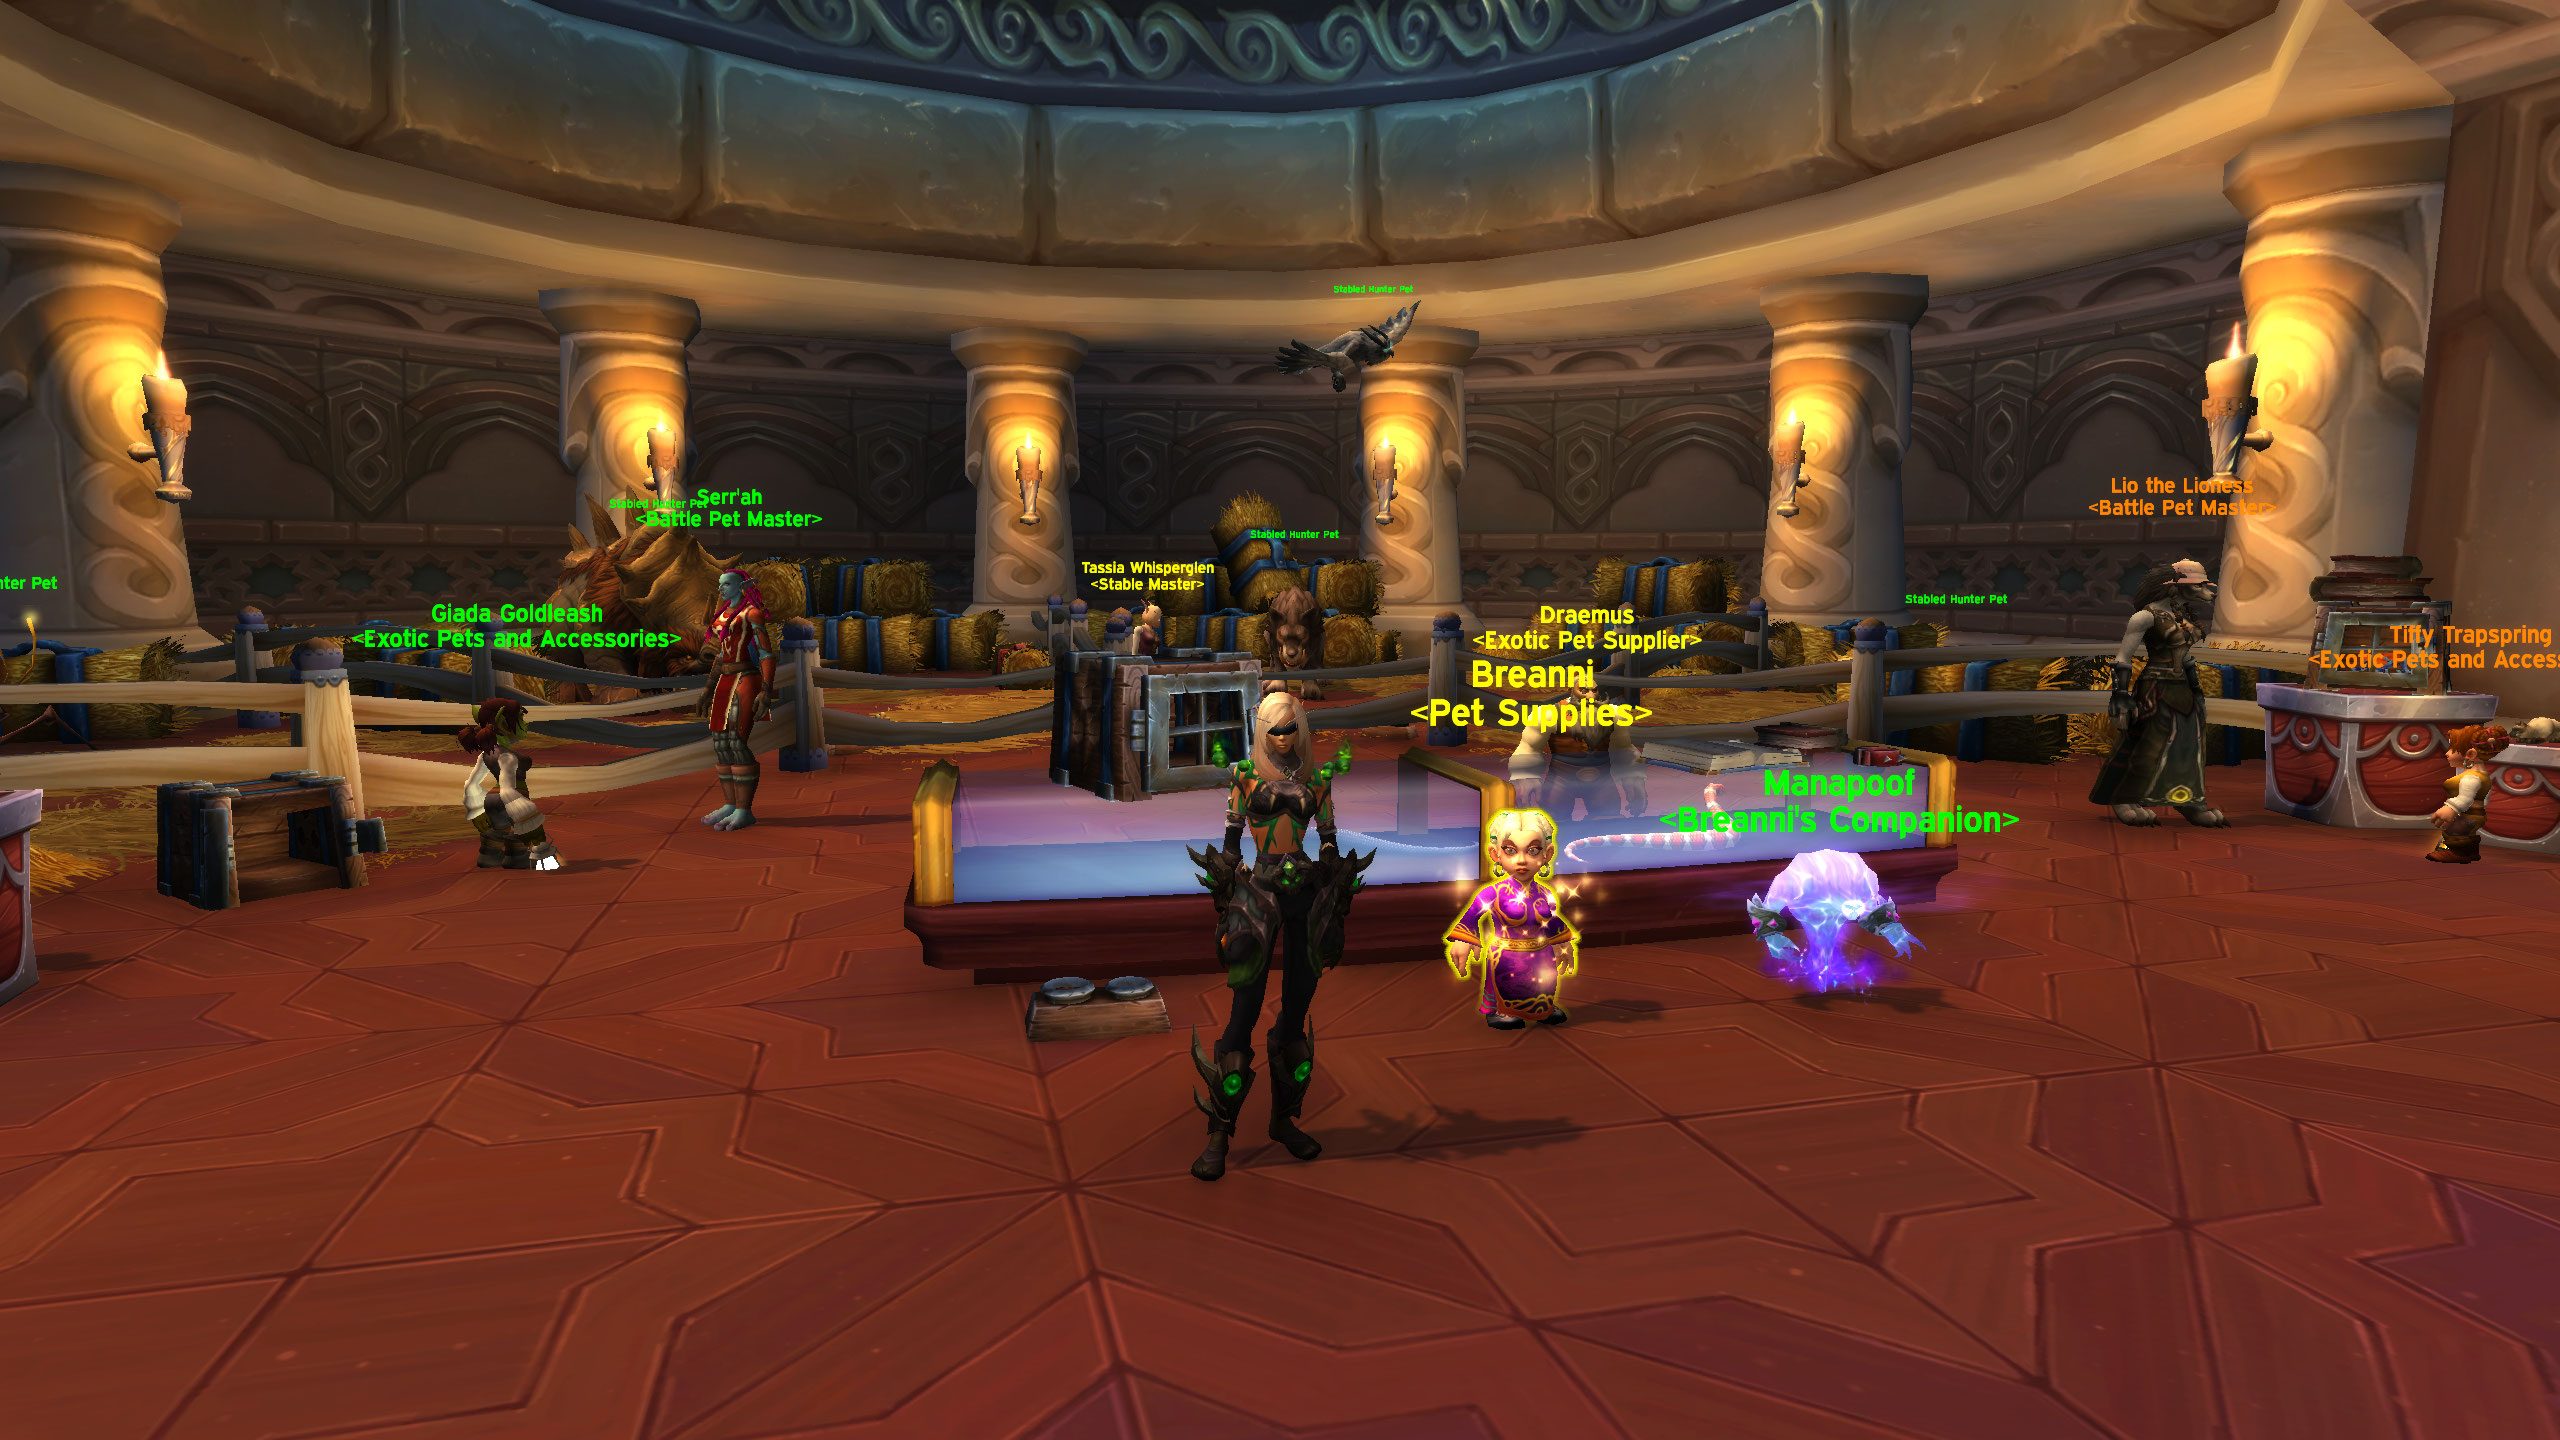 WoW Happy Pet treats - a demon hunter character is standing next to the pet supplies vendor inside the Magical Menagerie shop in Dalaran